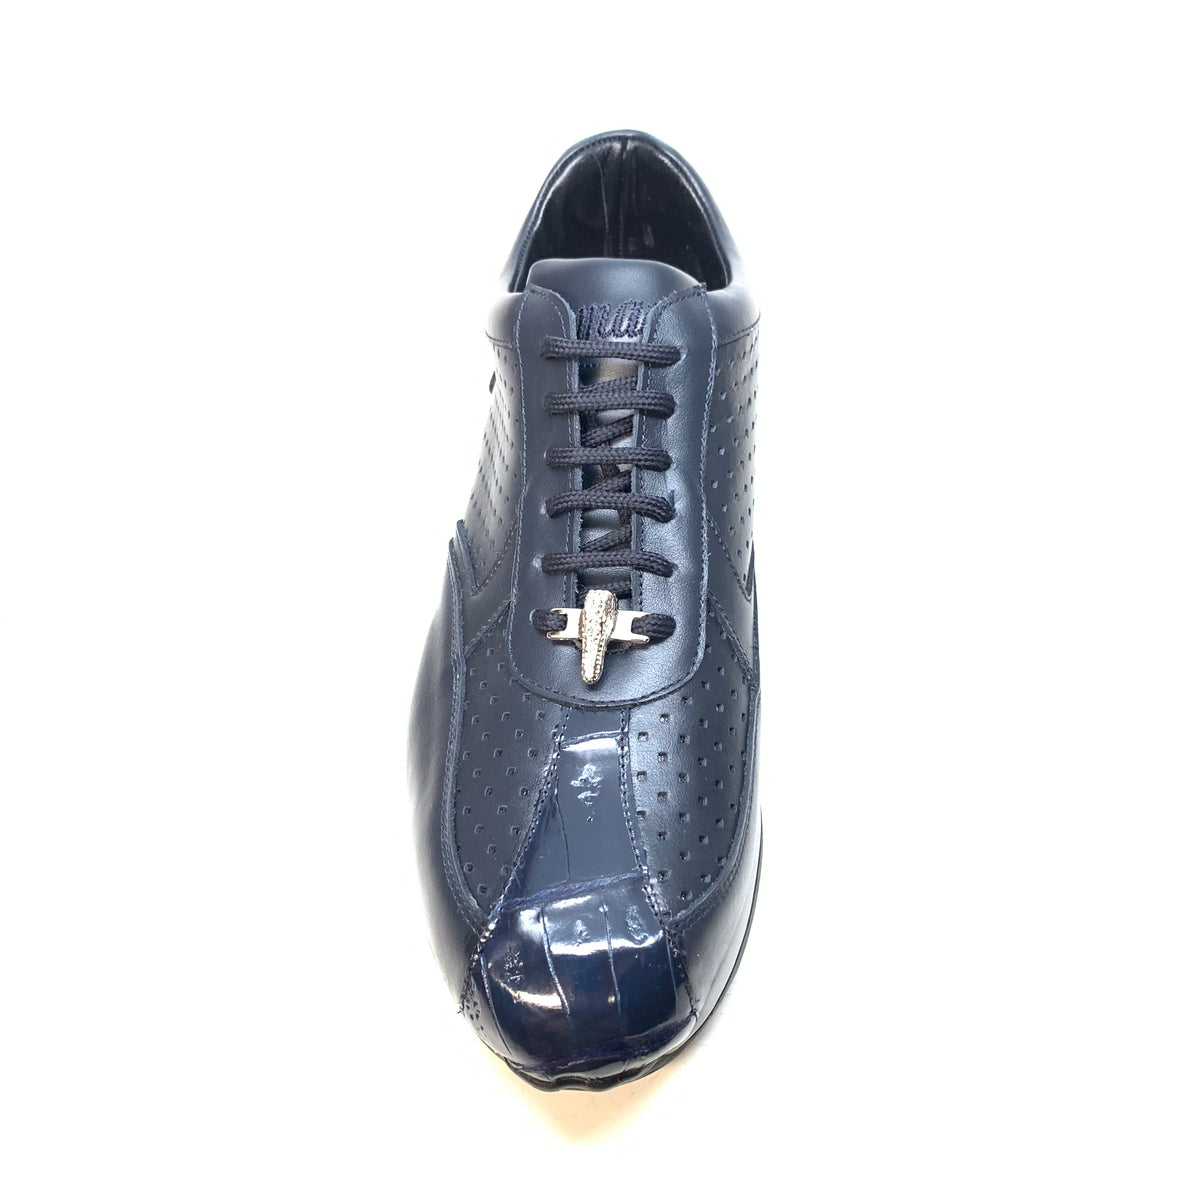 Mauri M770 Navy Crocodile Perforated Nappa Leather Sneakers - Dudes Boutique